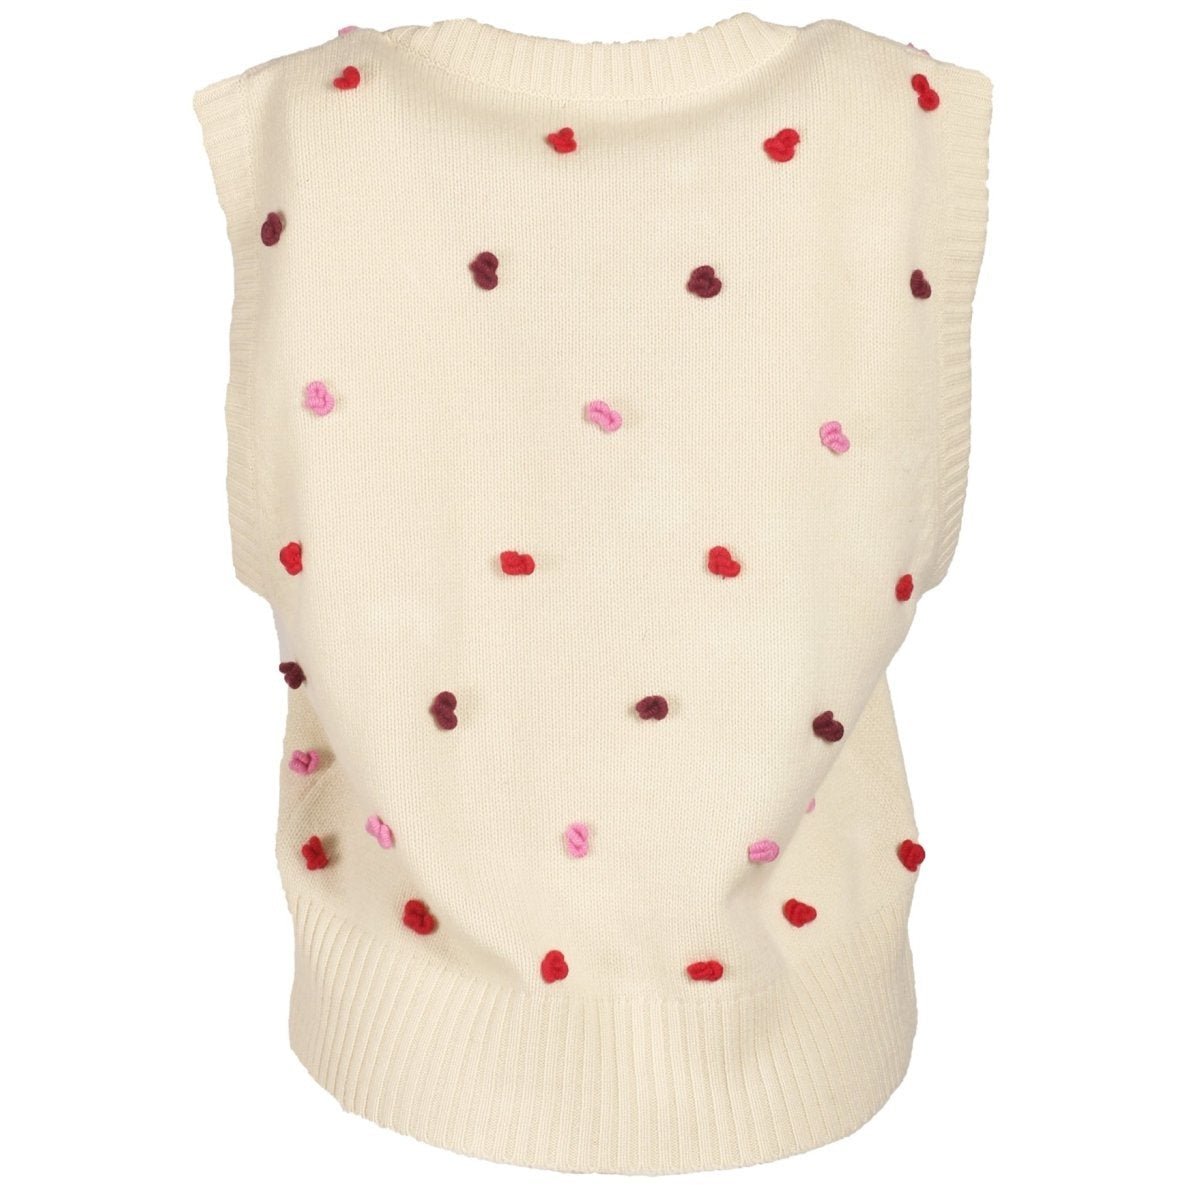 Bobble Quinn Knitted Sweater Vest - Crumpet Chowk